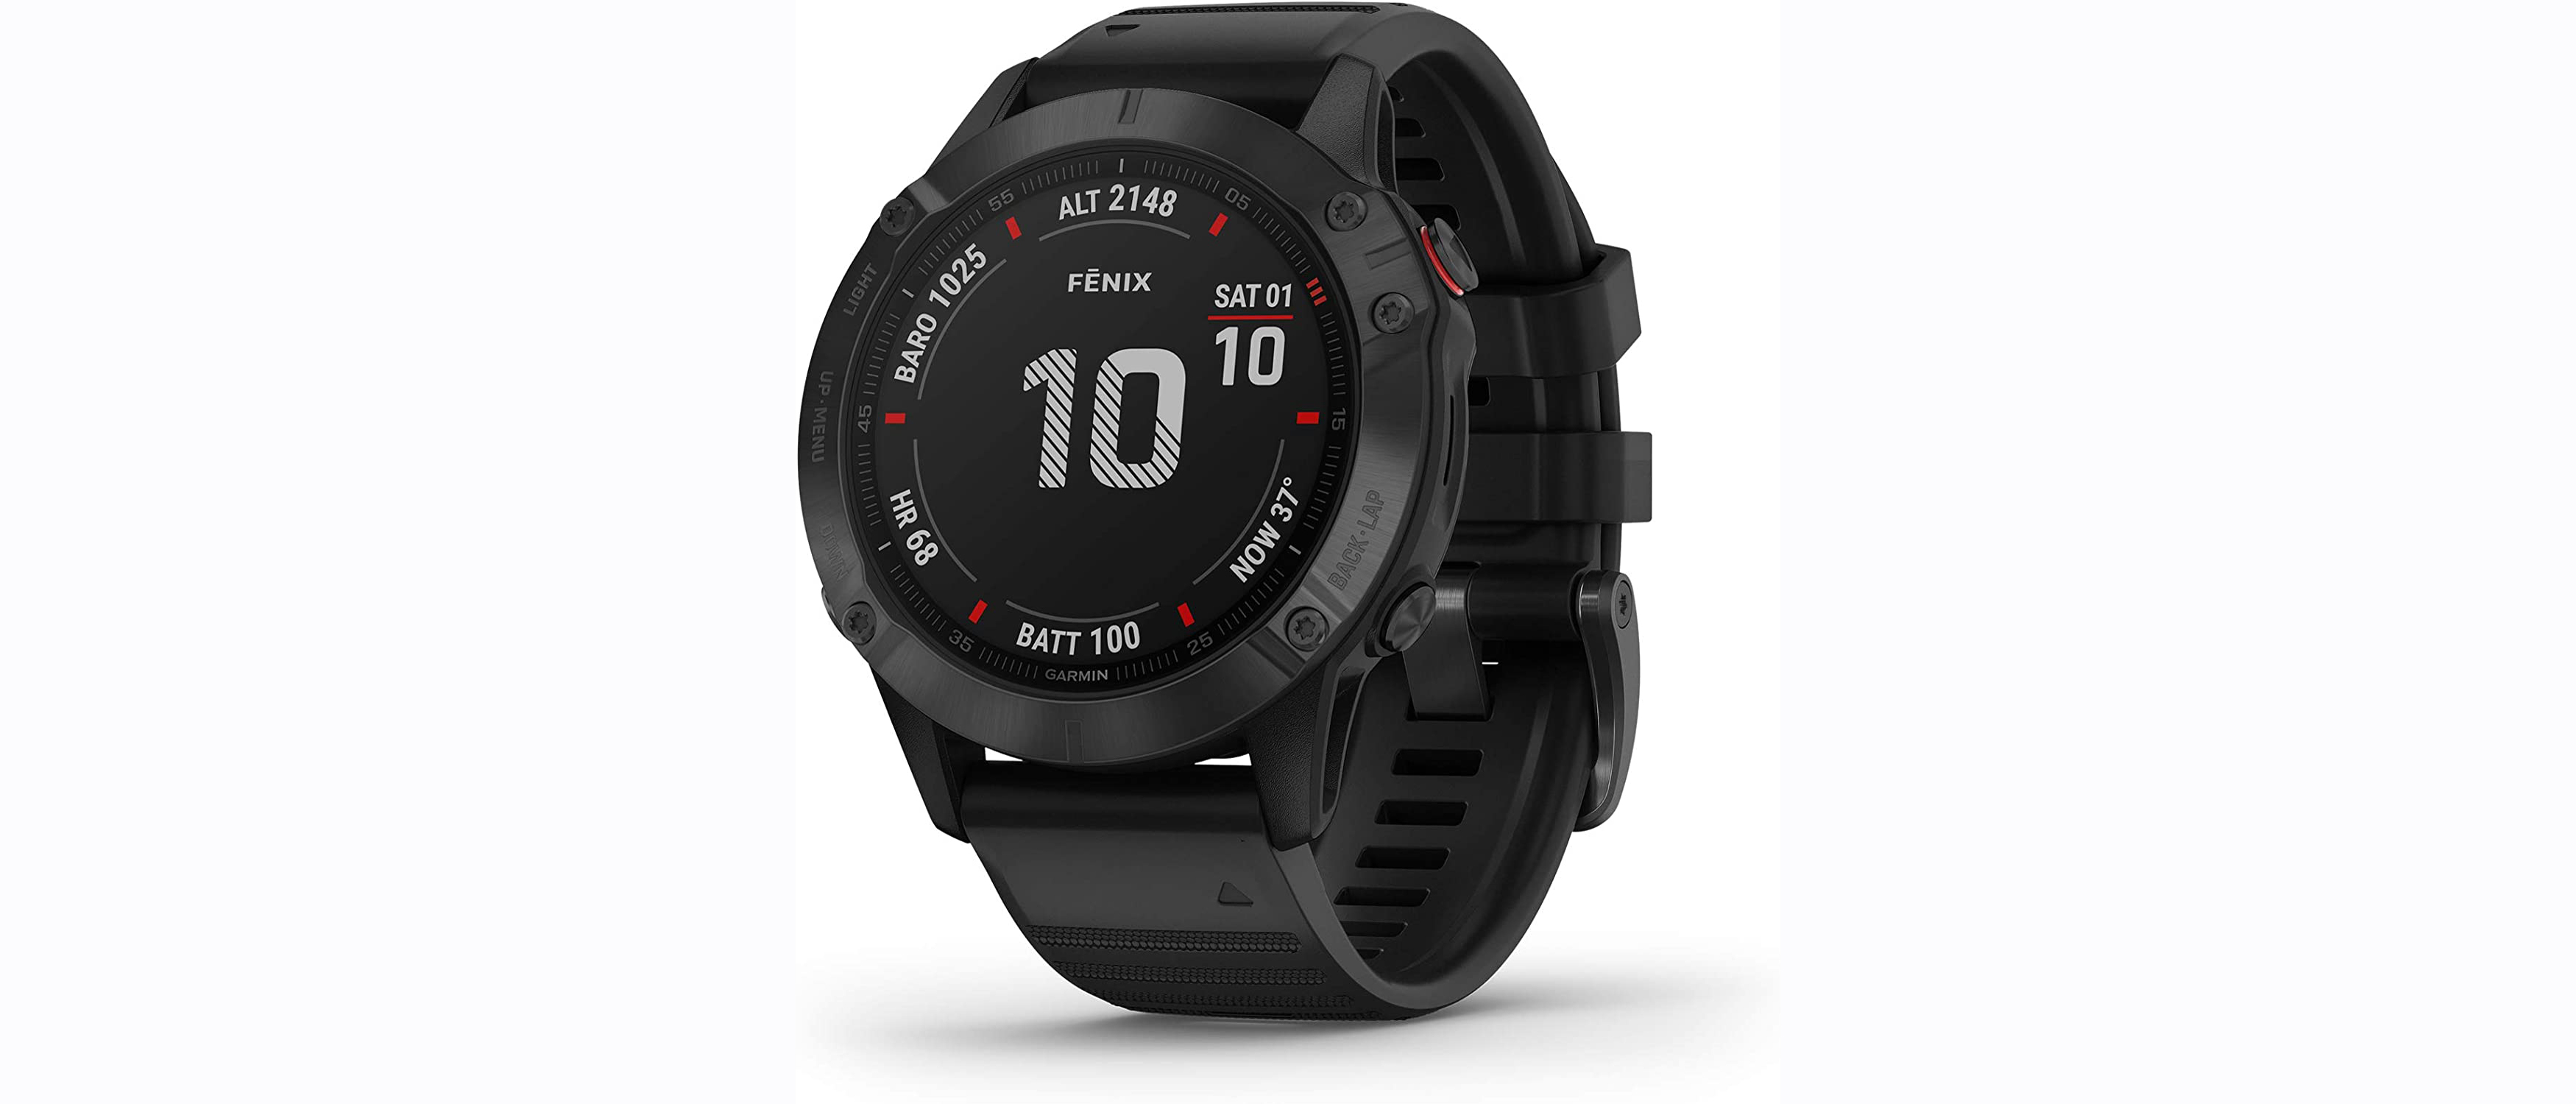 The Garmin Fenix 6 Pro is one of our favorite running watches